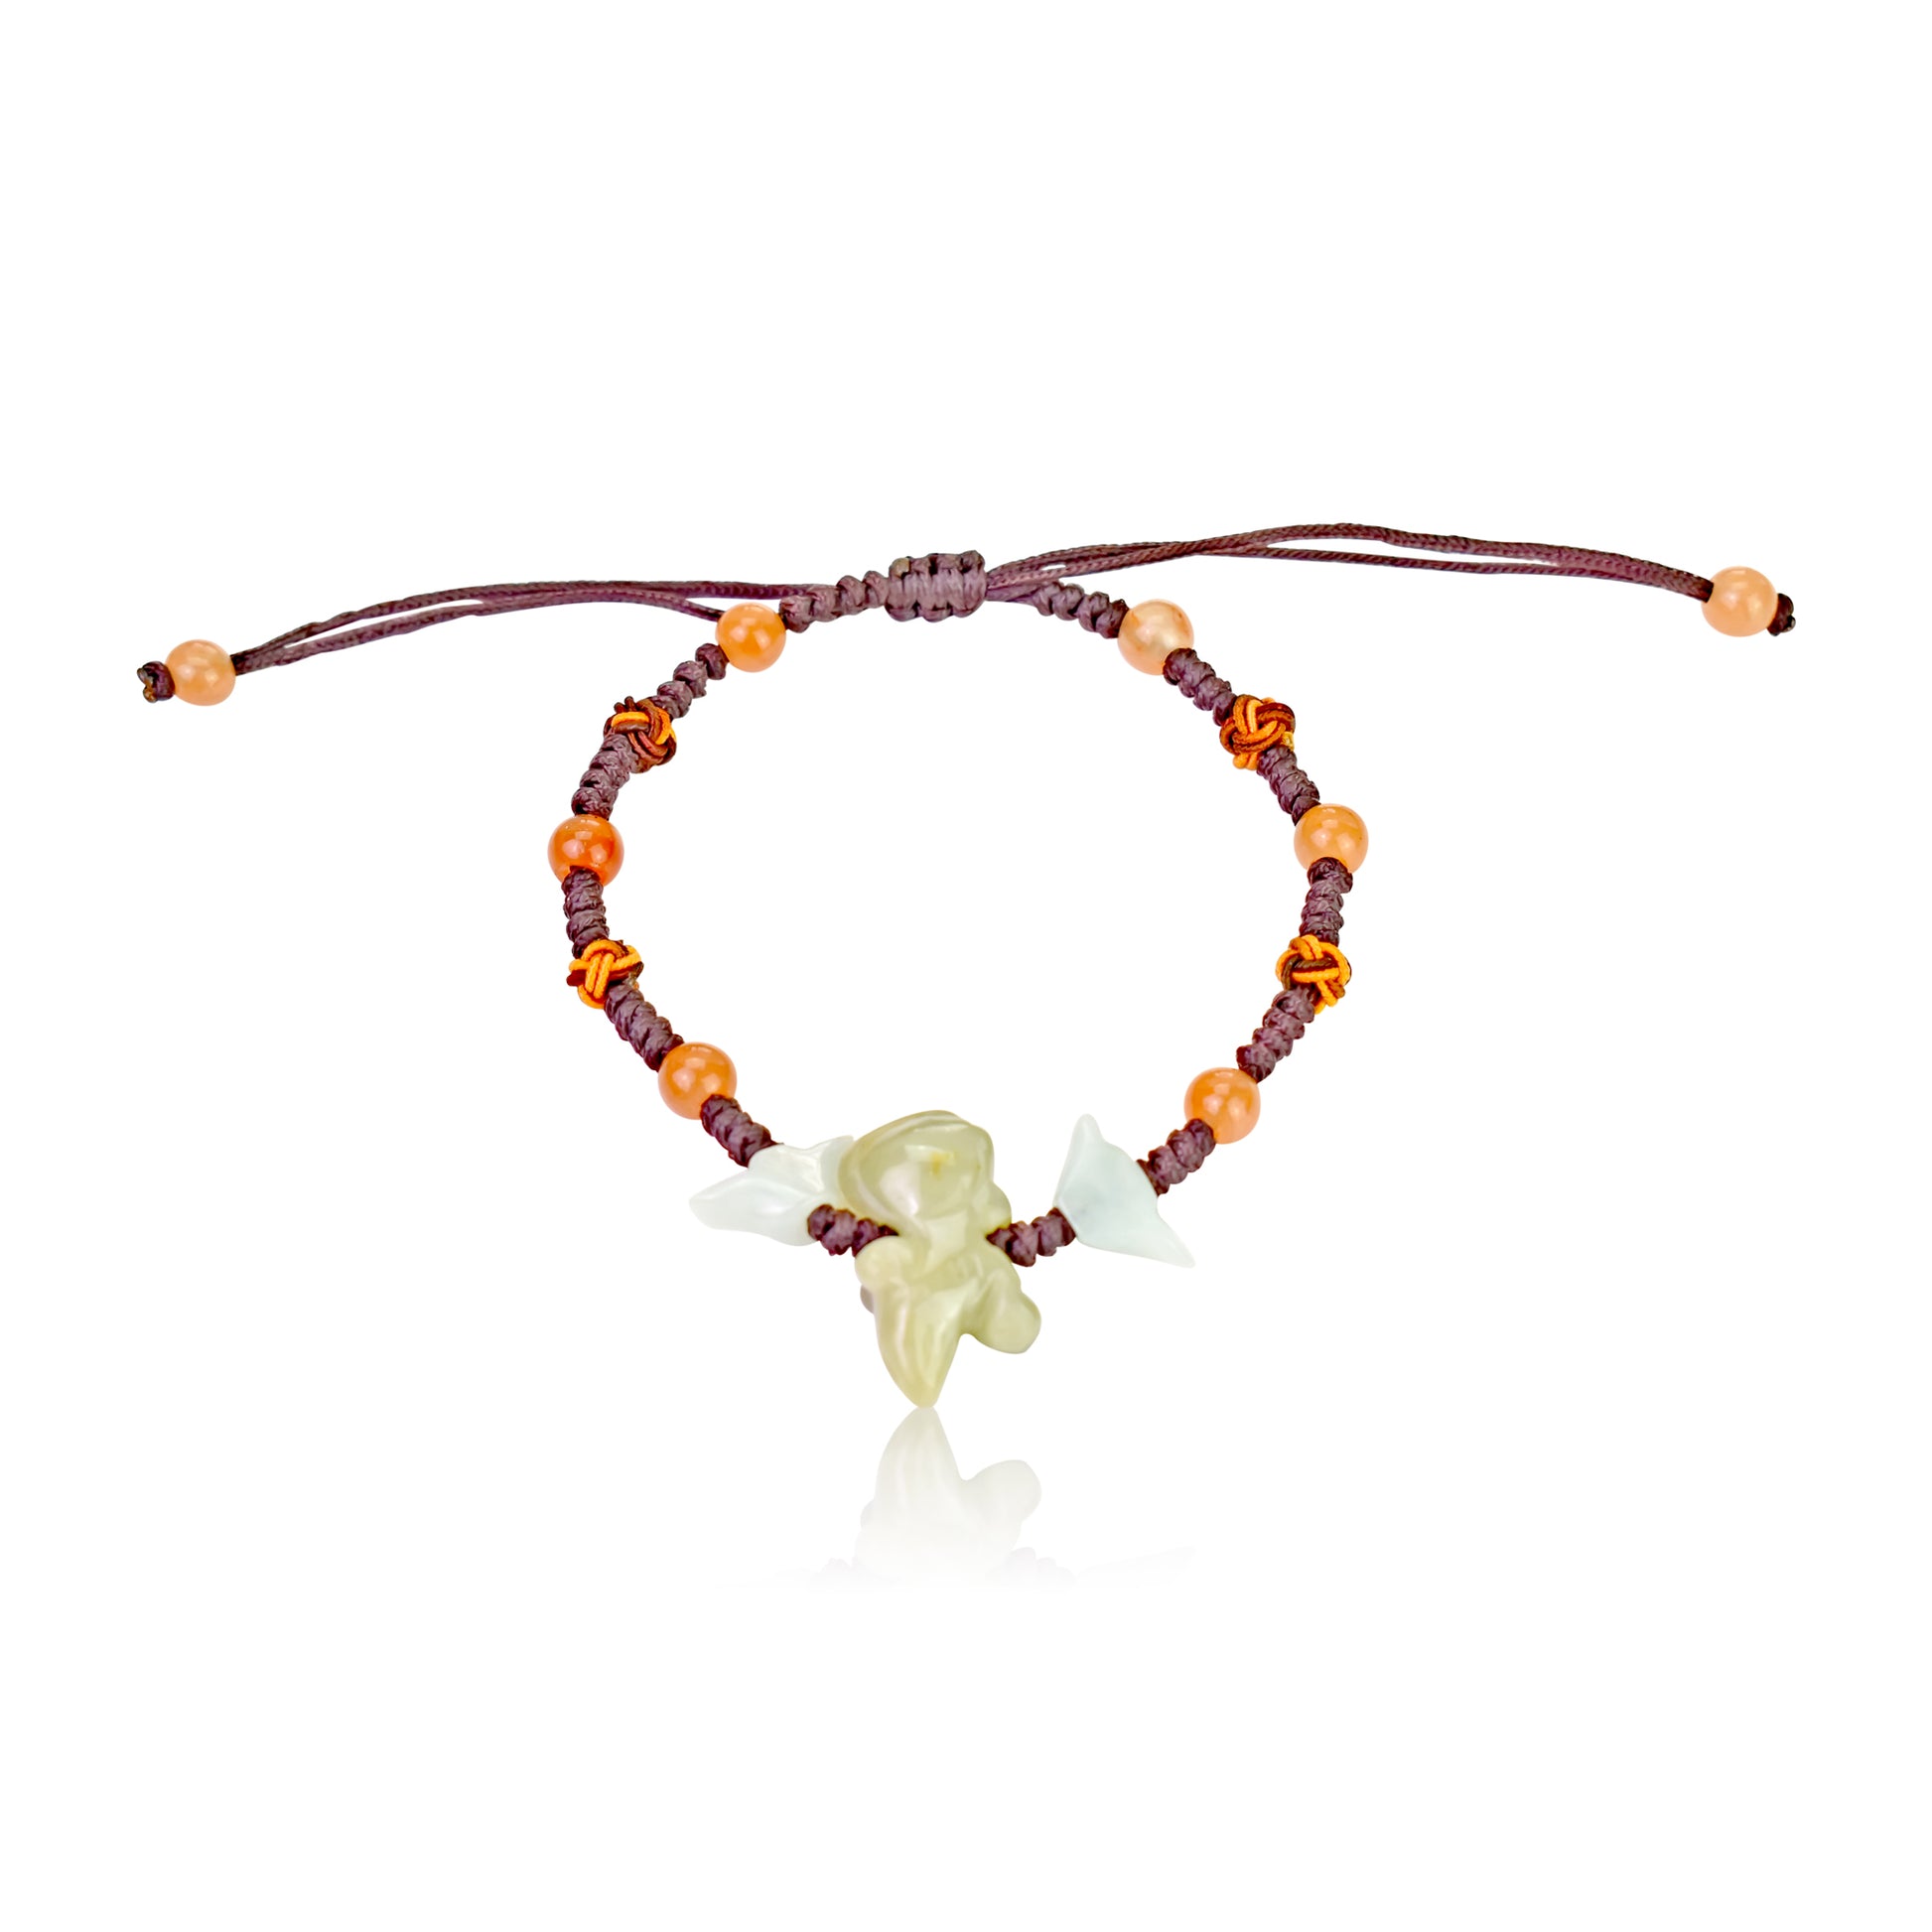 Become Ambitious with a Rat Symbolized Jade Bracelet made with Brown Cord